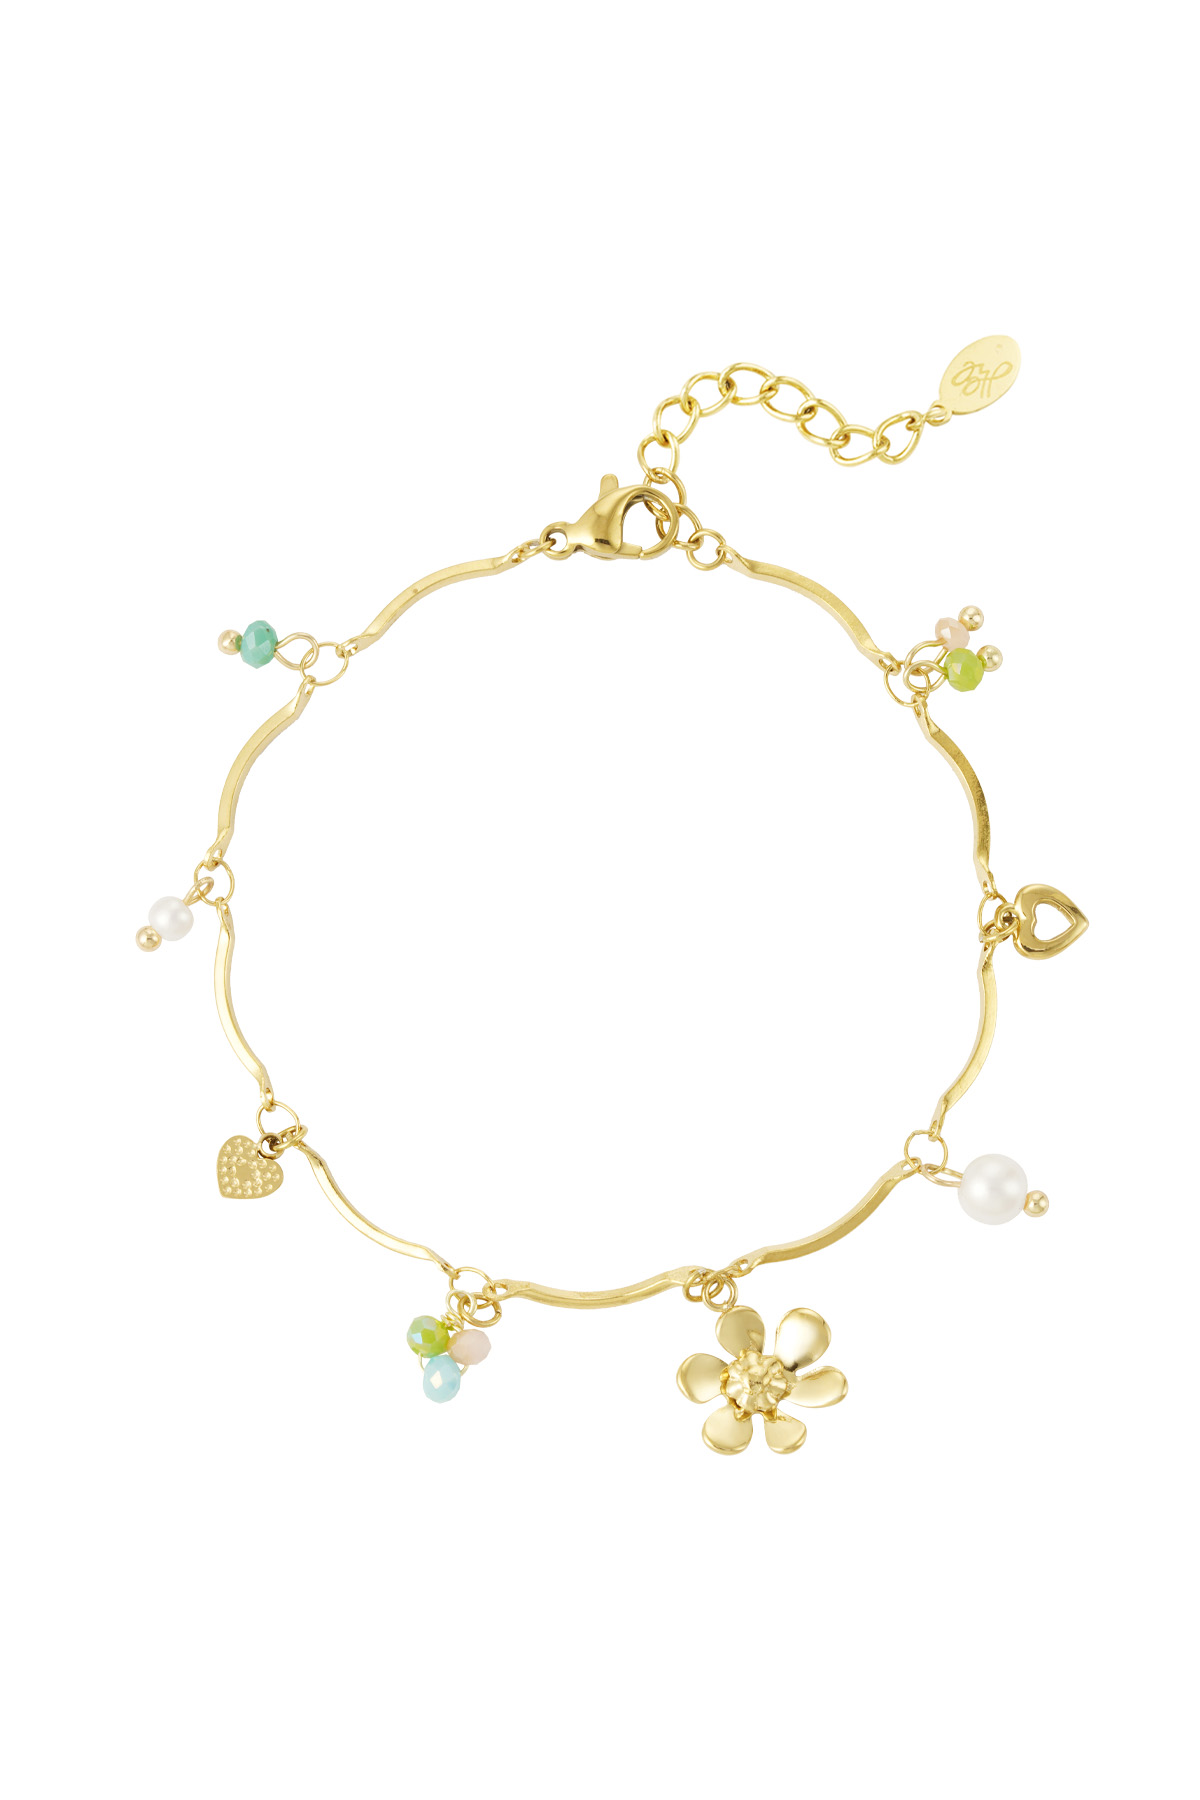 Armband Sommerblume - gold